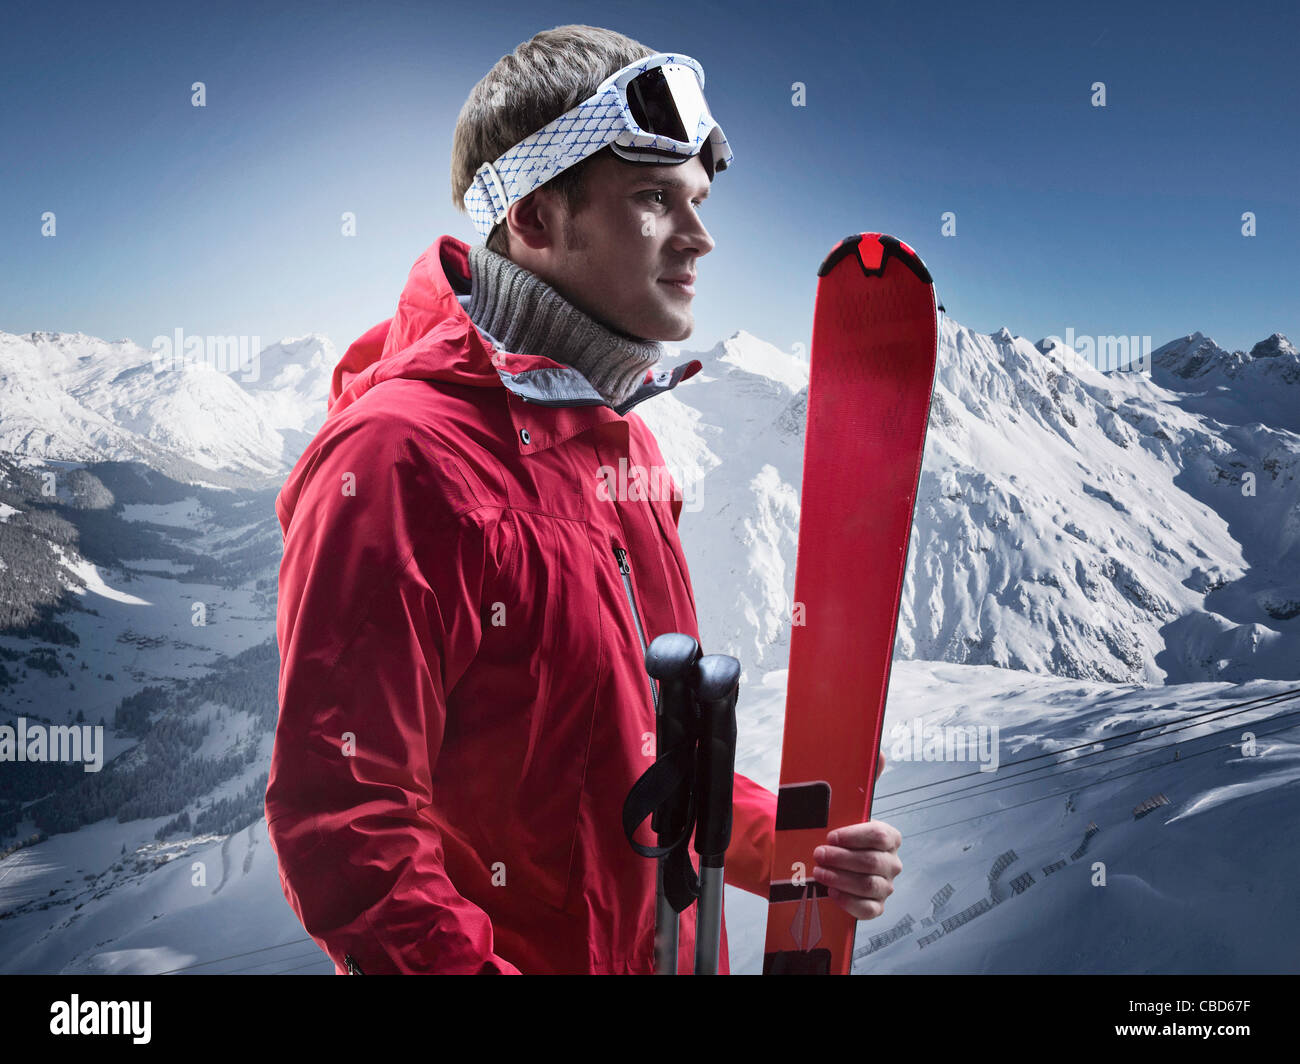 Man carrying skis on snowy mountain Banque D'Images